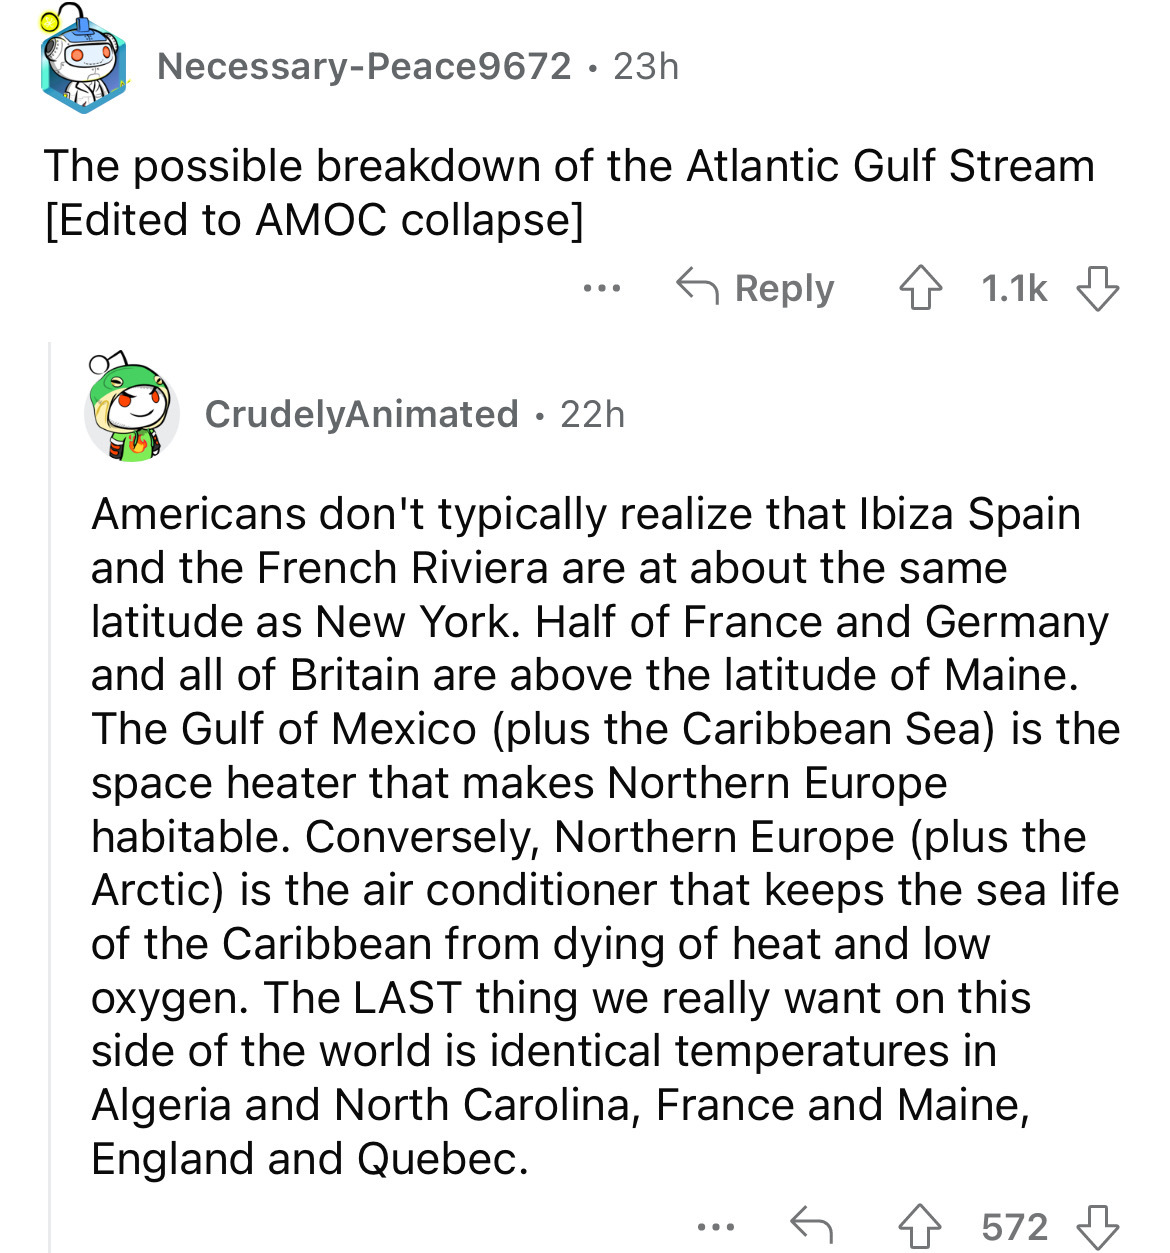 document - NecessaryPeace9672 23h . The possible breakdown of the Atlantic Gulf Stream Edited to Amoc collapse ... CrudelyAnimated 22h . Americans don't typically realize that Ibiza Spain and the French Riviera are at about the same latitude as New York. 